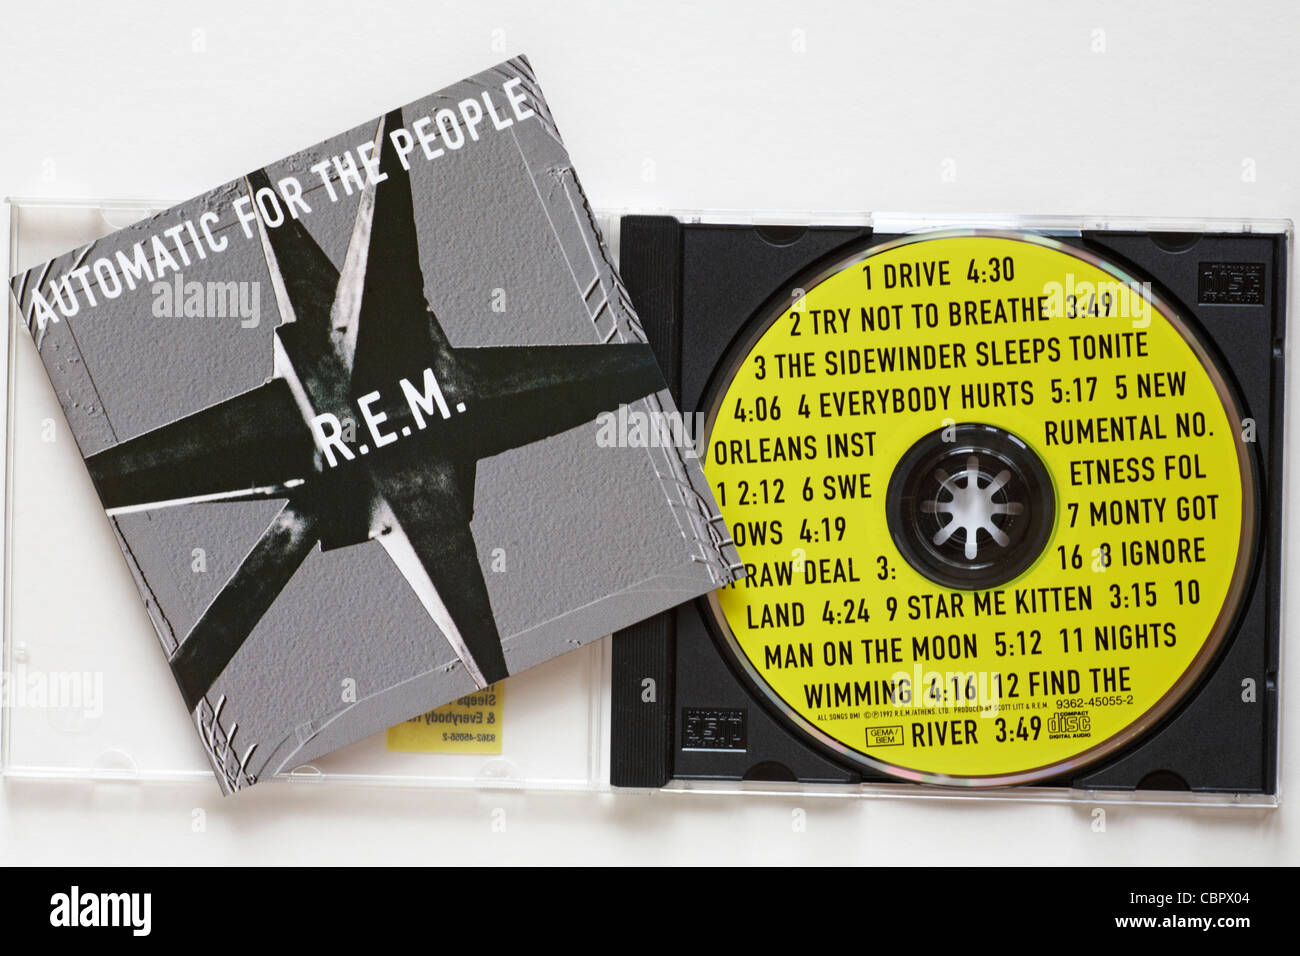 https://c8.alamy.com/comp/CBPX04/rem-cd-automatic-for-the-people-with-case-open-to-show-disc-and-tracks-CBPX04.jpg